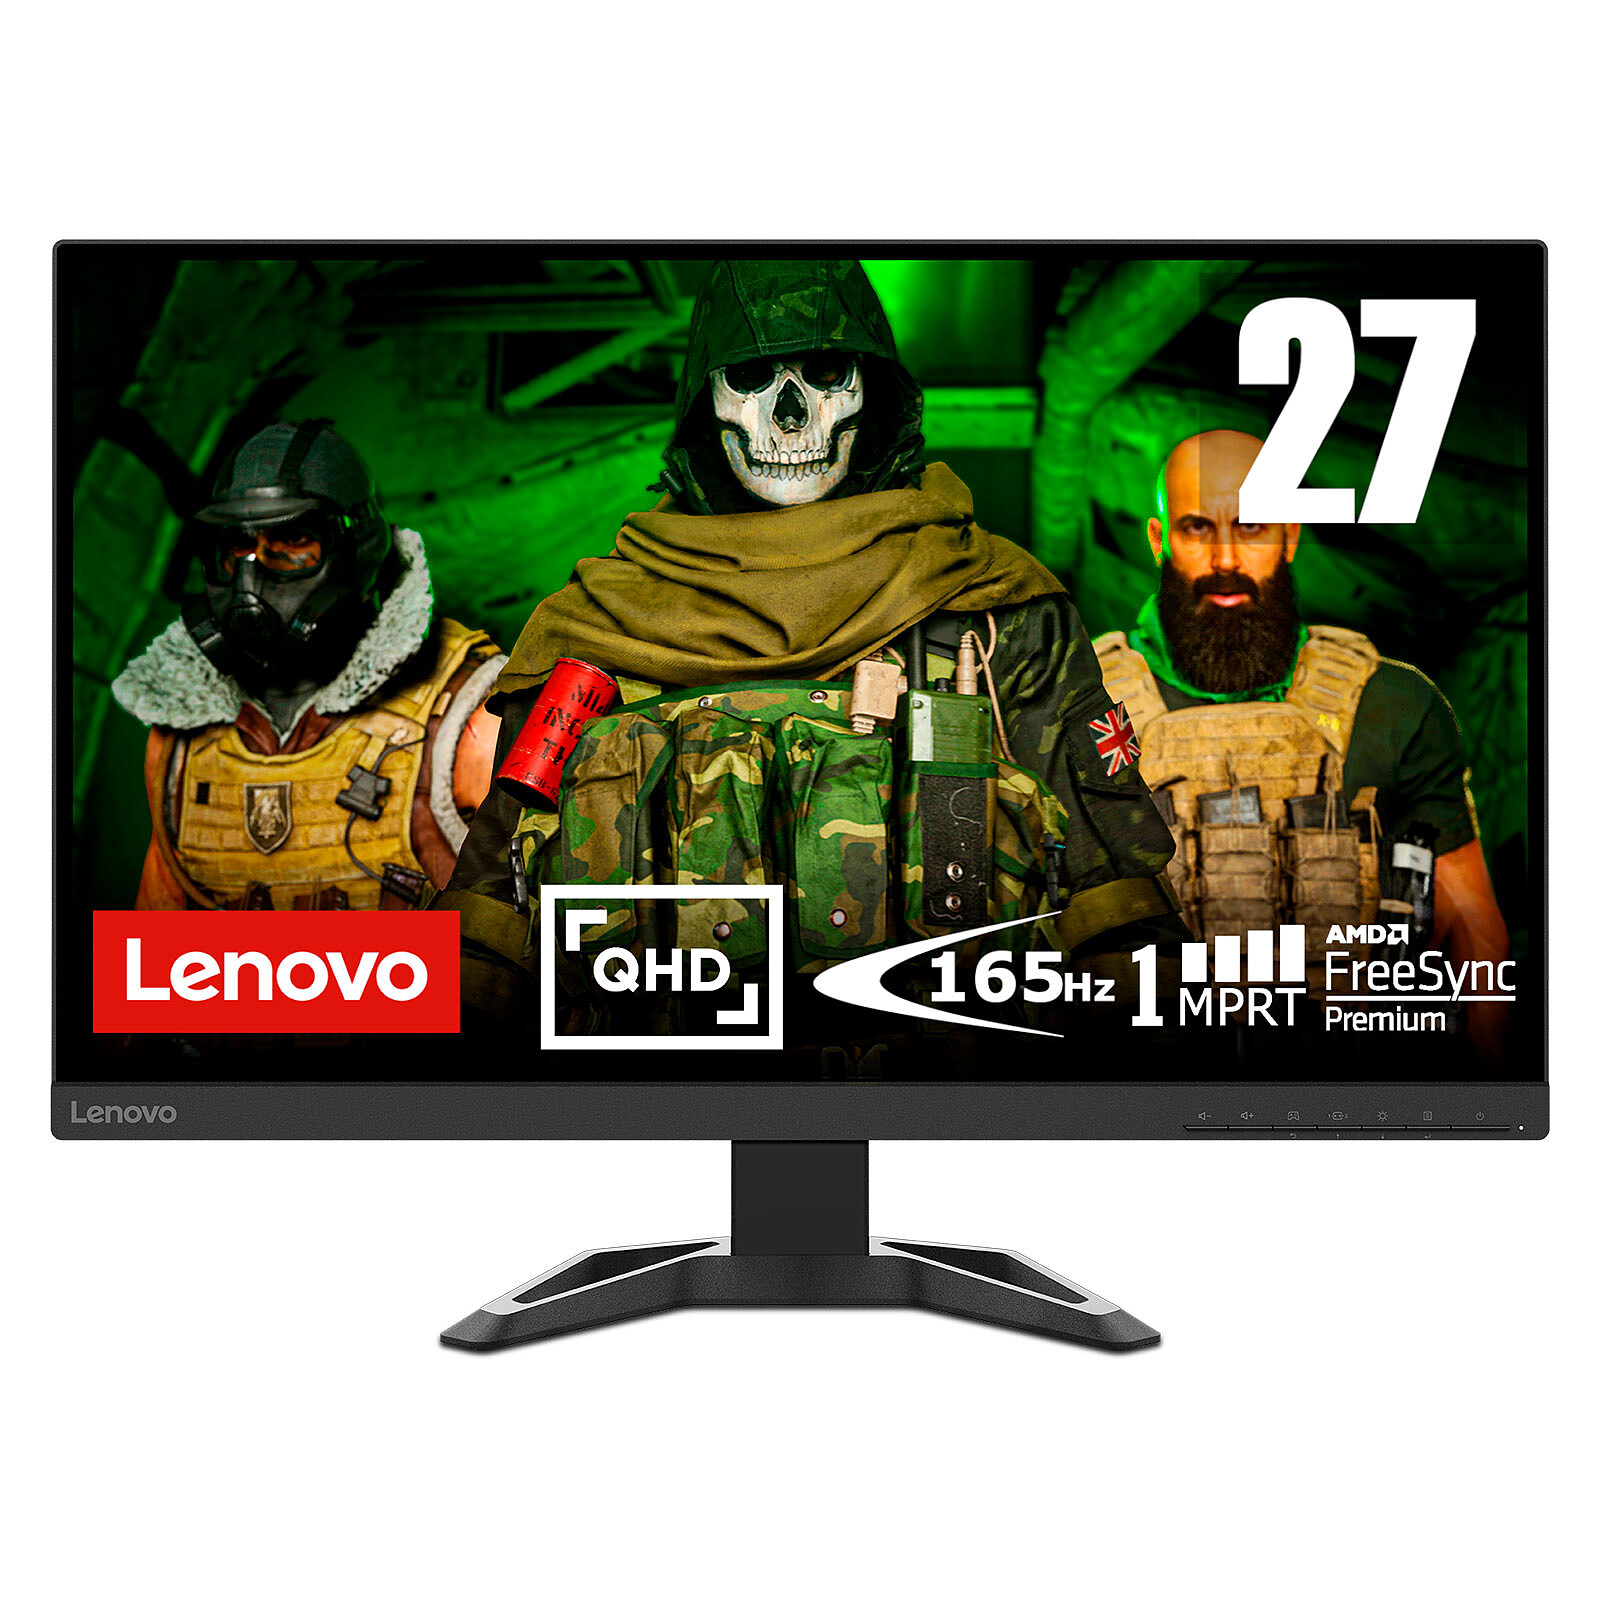 ViewSonic VA2715-2K-MHD 27” 2K Monitor with Fast 1ms Response Time